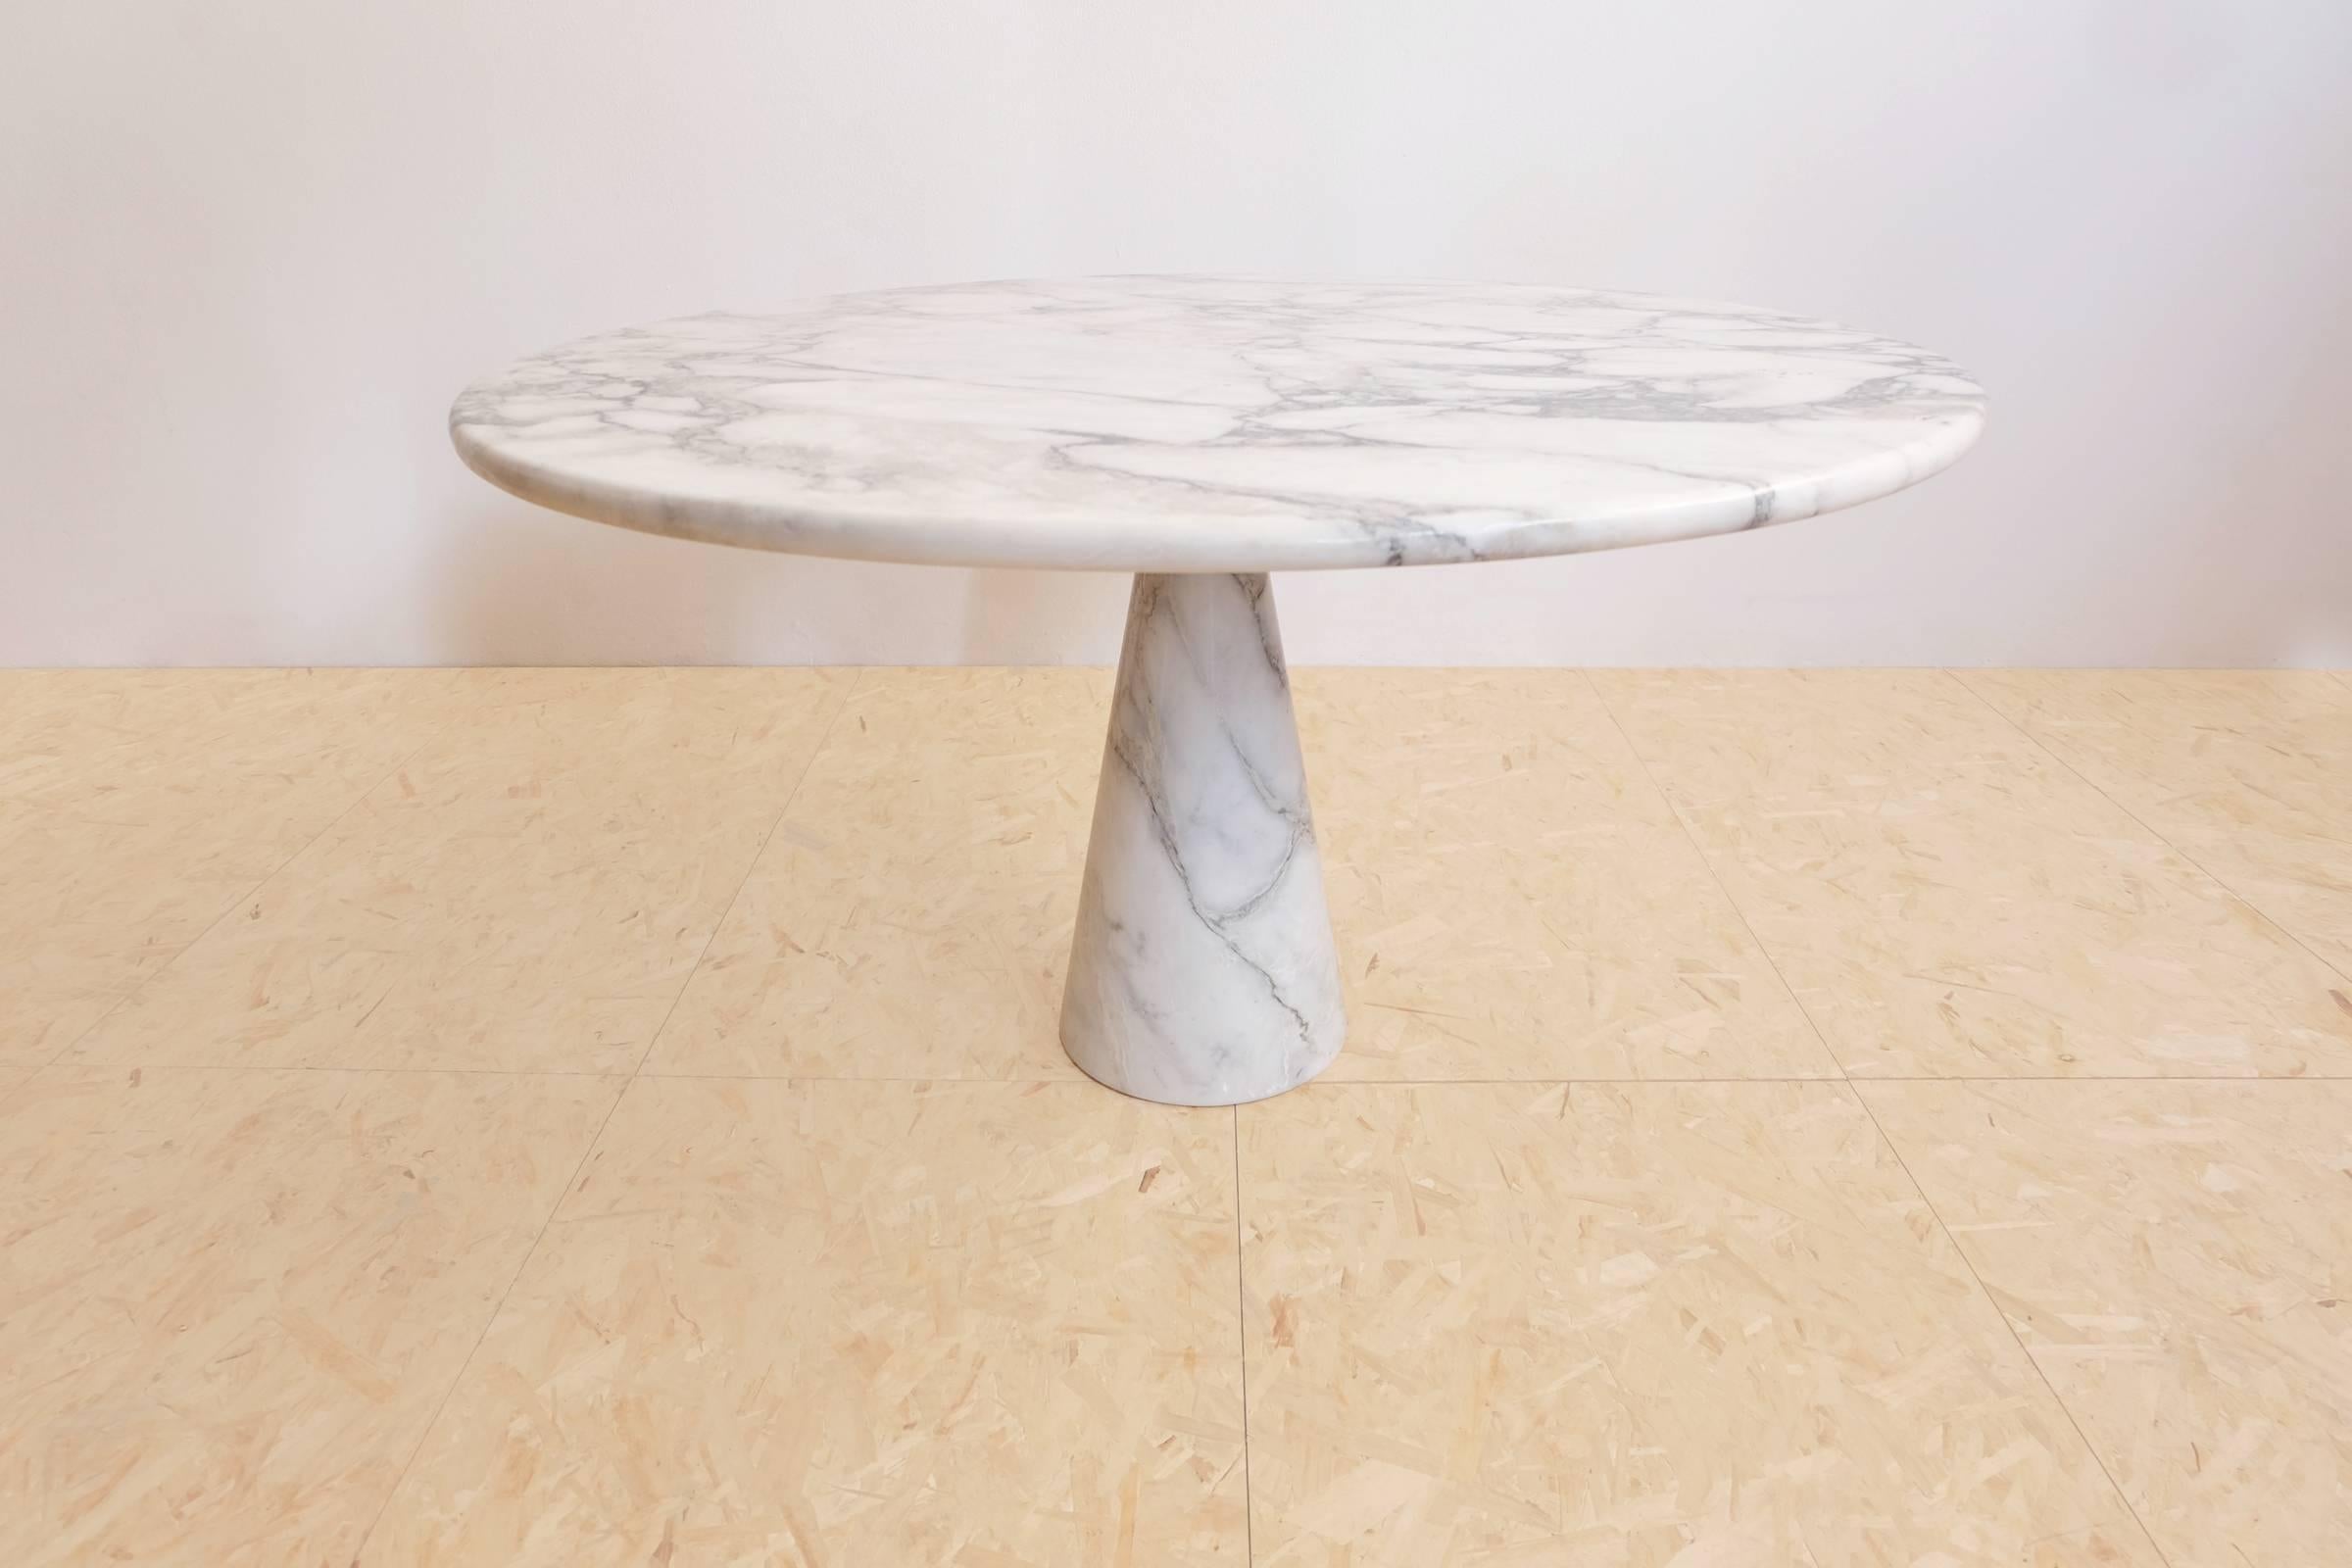 Round Angelo Mangiarotti marble table model M1 designed in the 1969 and manufactured by Skipper in Italy. 
Two-piece construction, measure: 3cm thick tabletop.